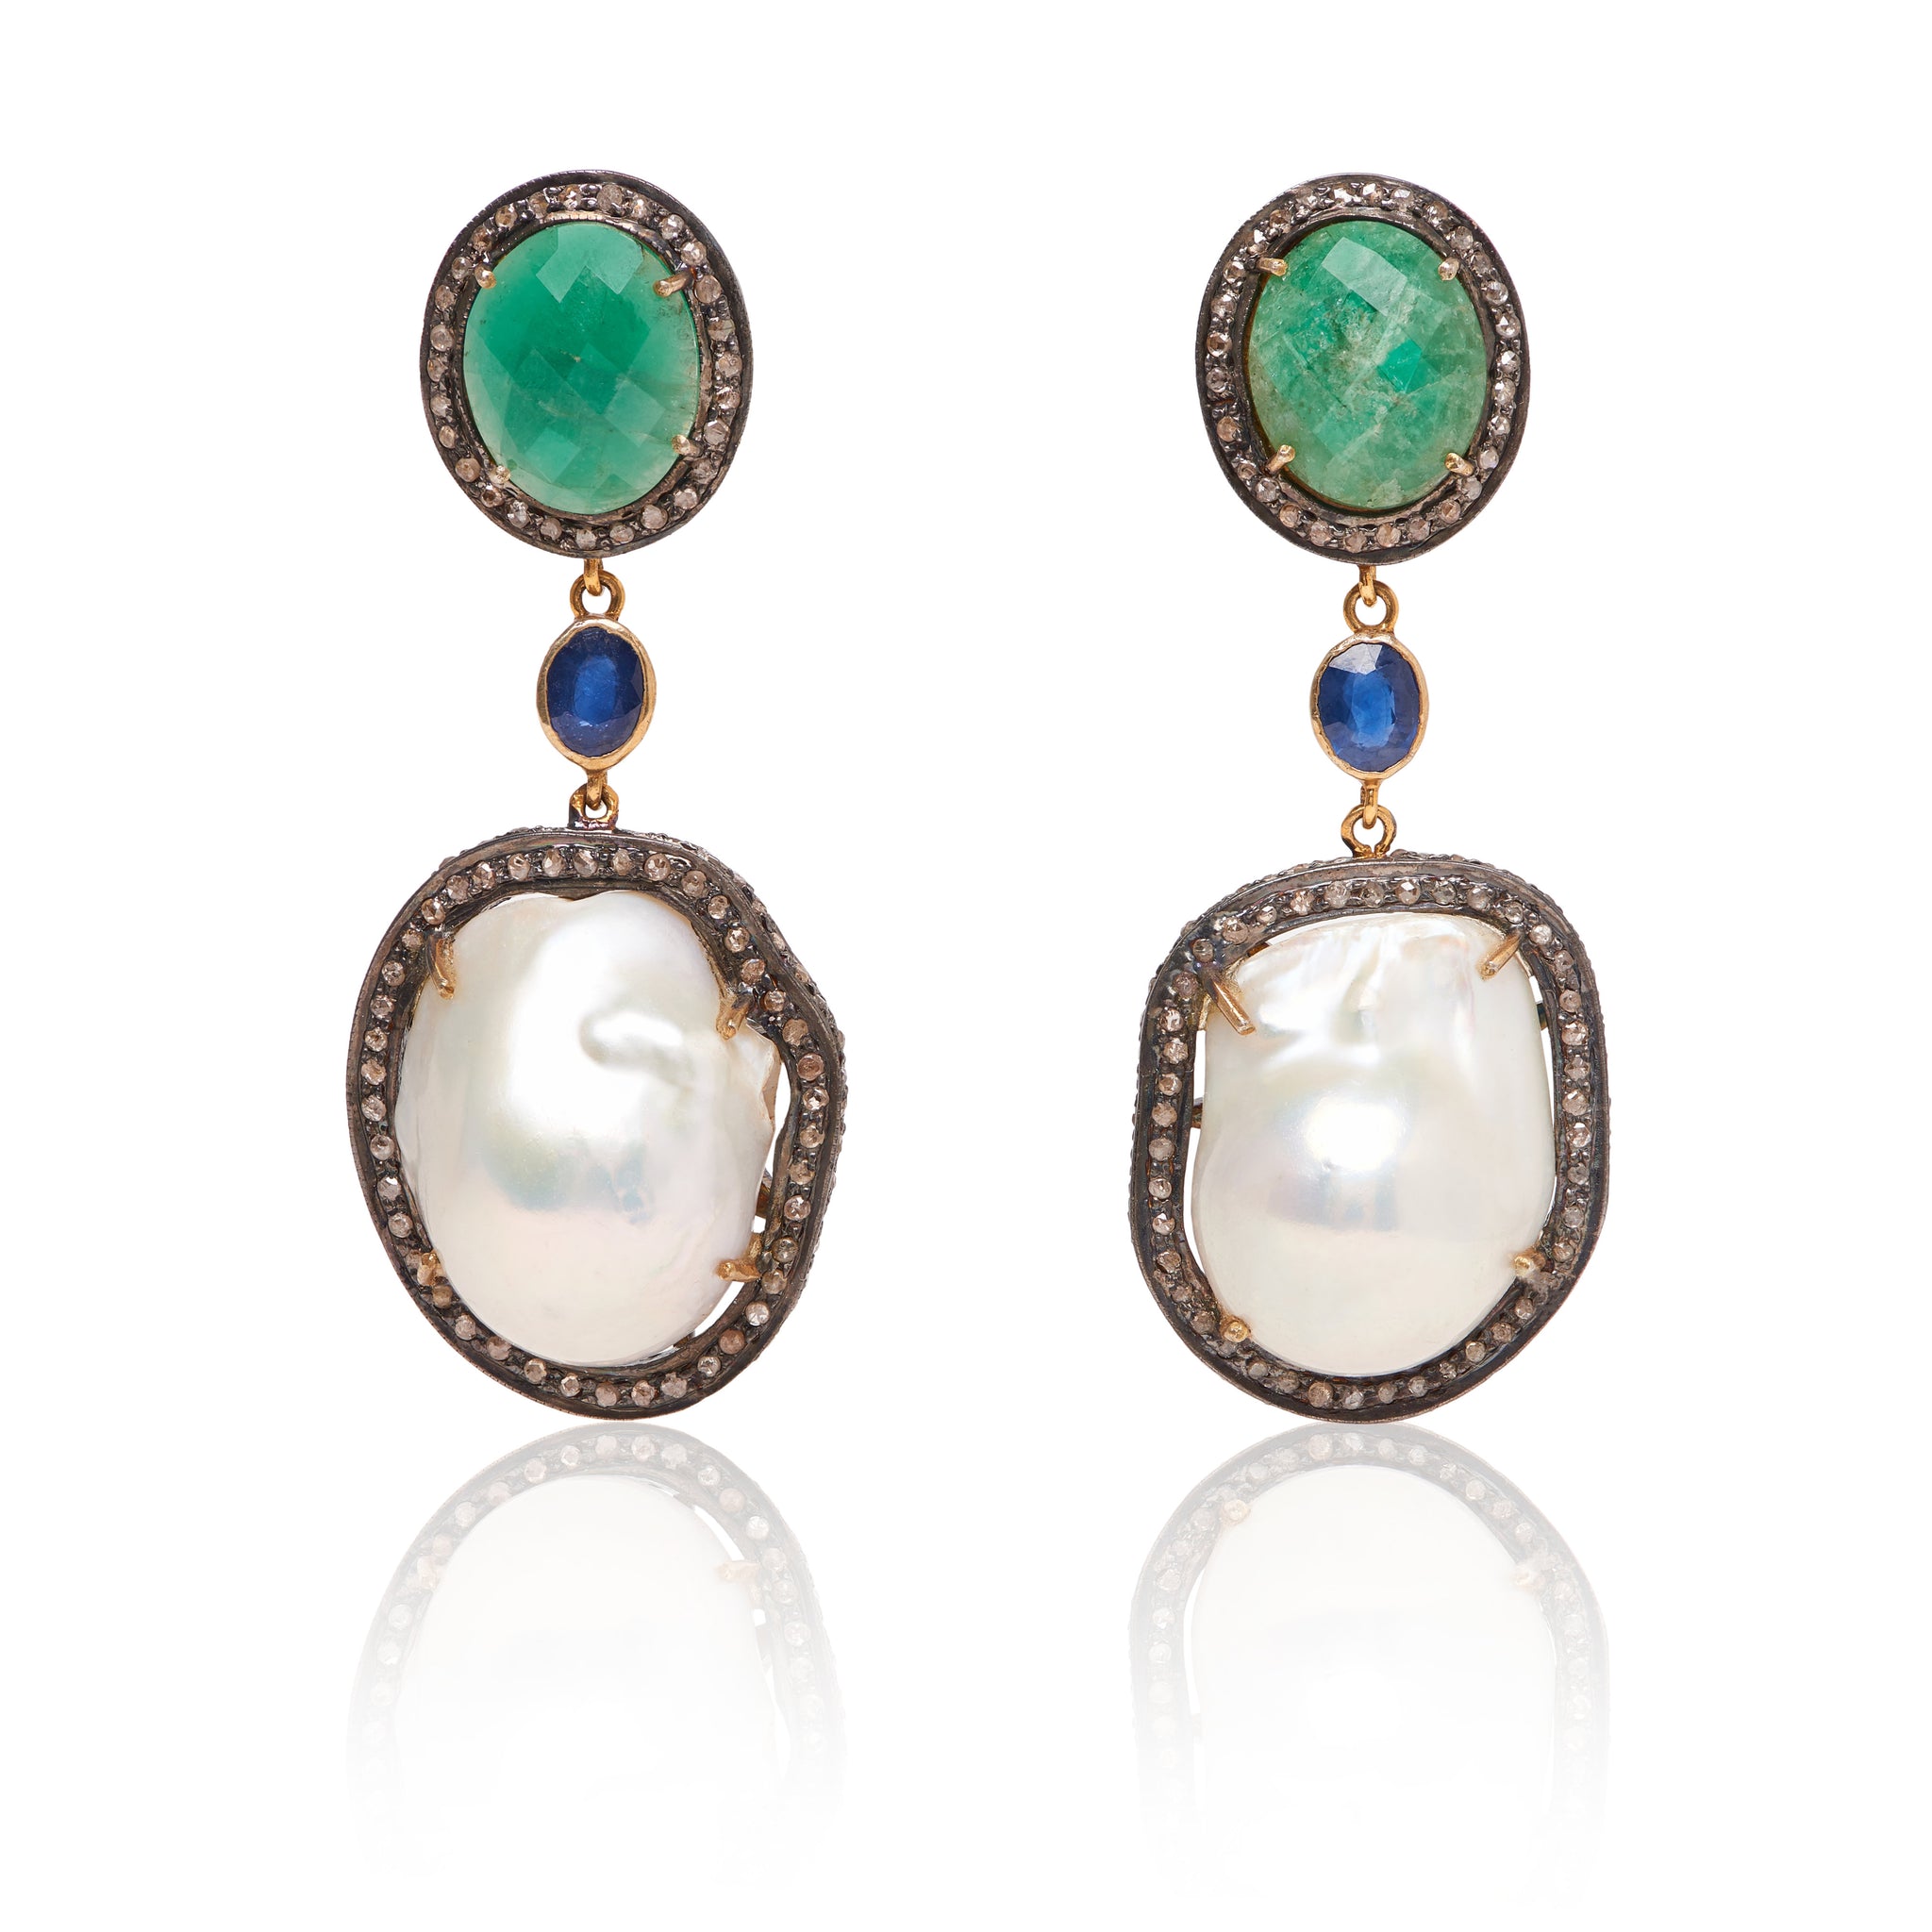 Emerald Sapphire and Baroque Pearl Triple Earring with Diamonds made in 14k yellow gold